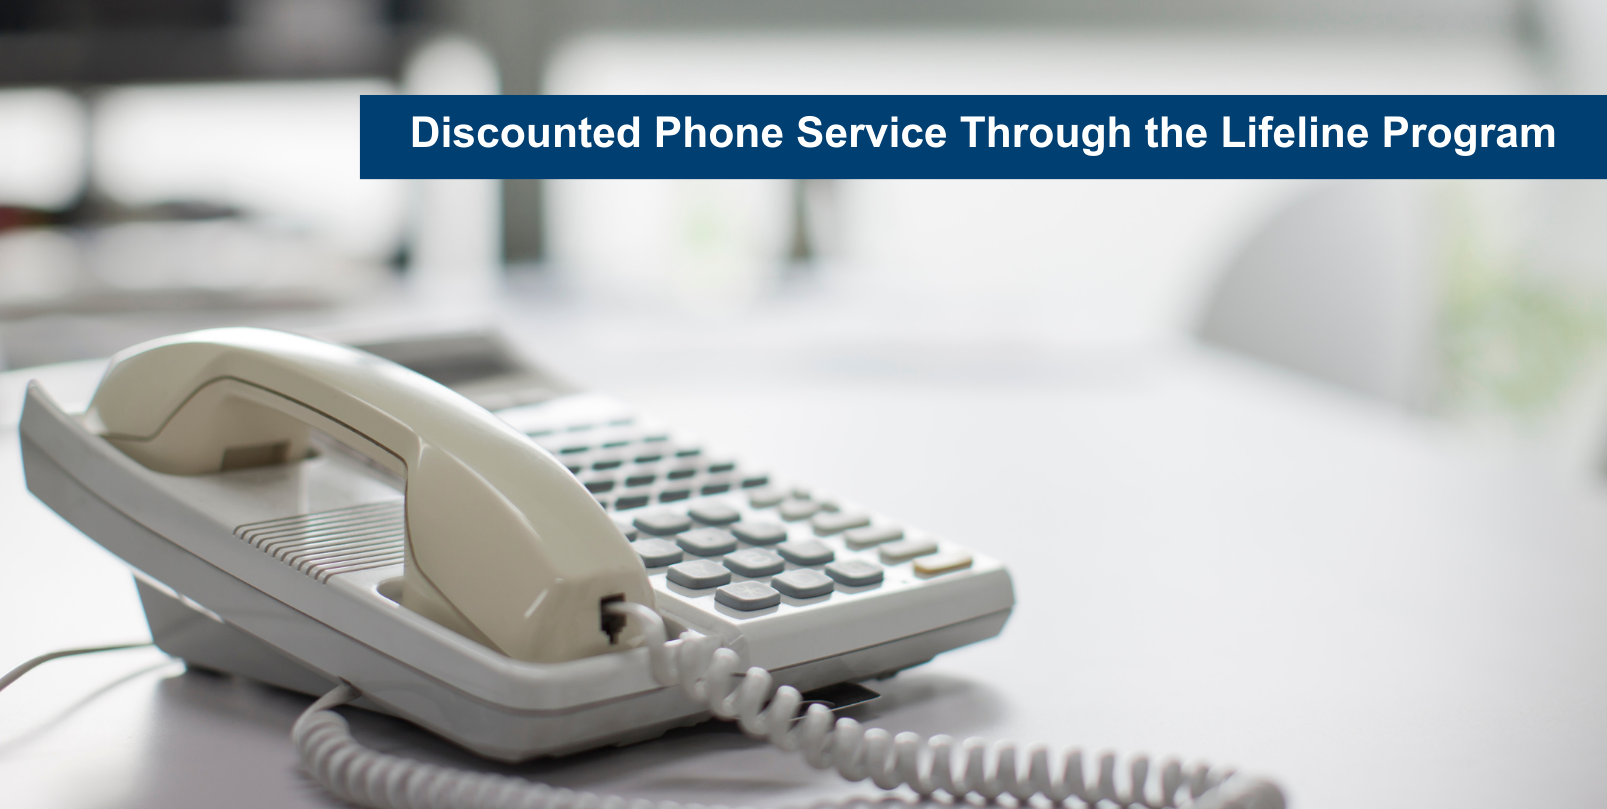 Discounted phone service for FEMA Assistance Recipients